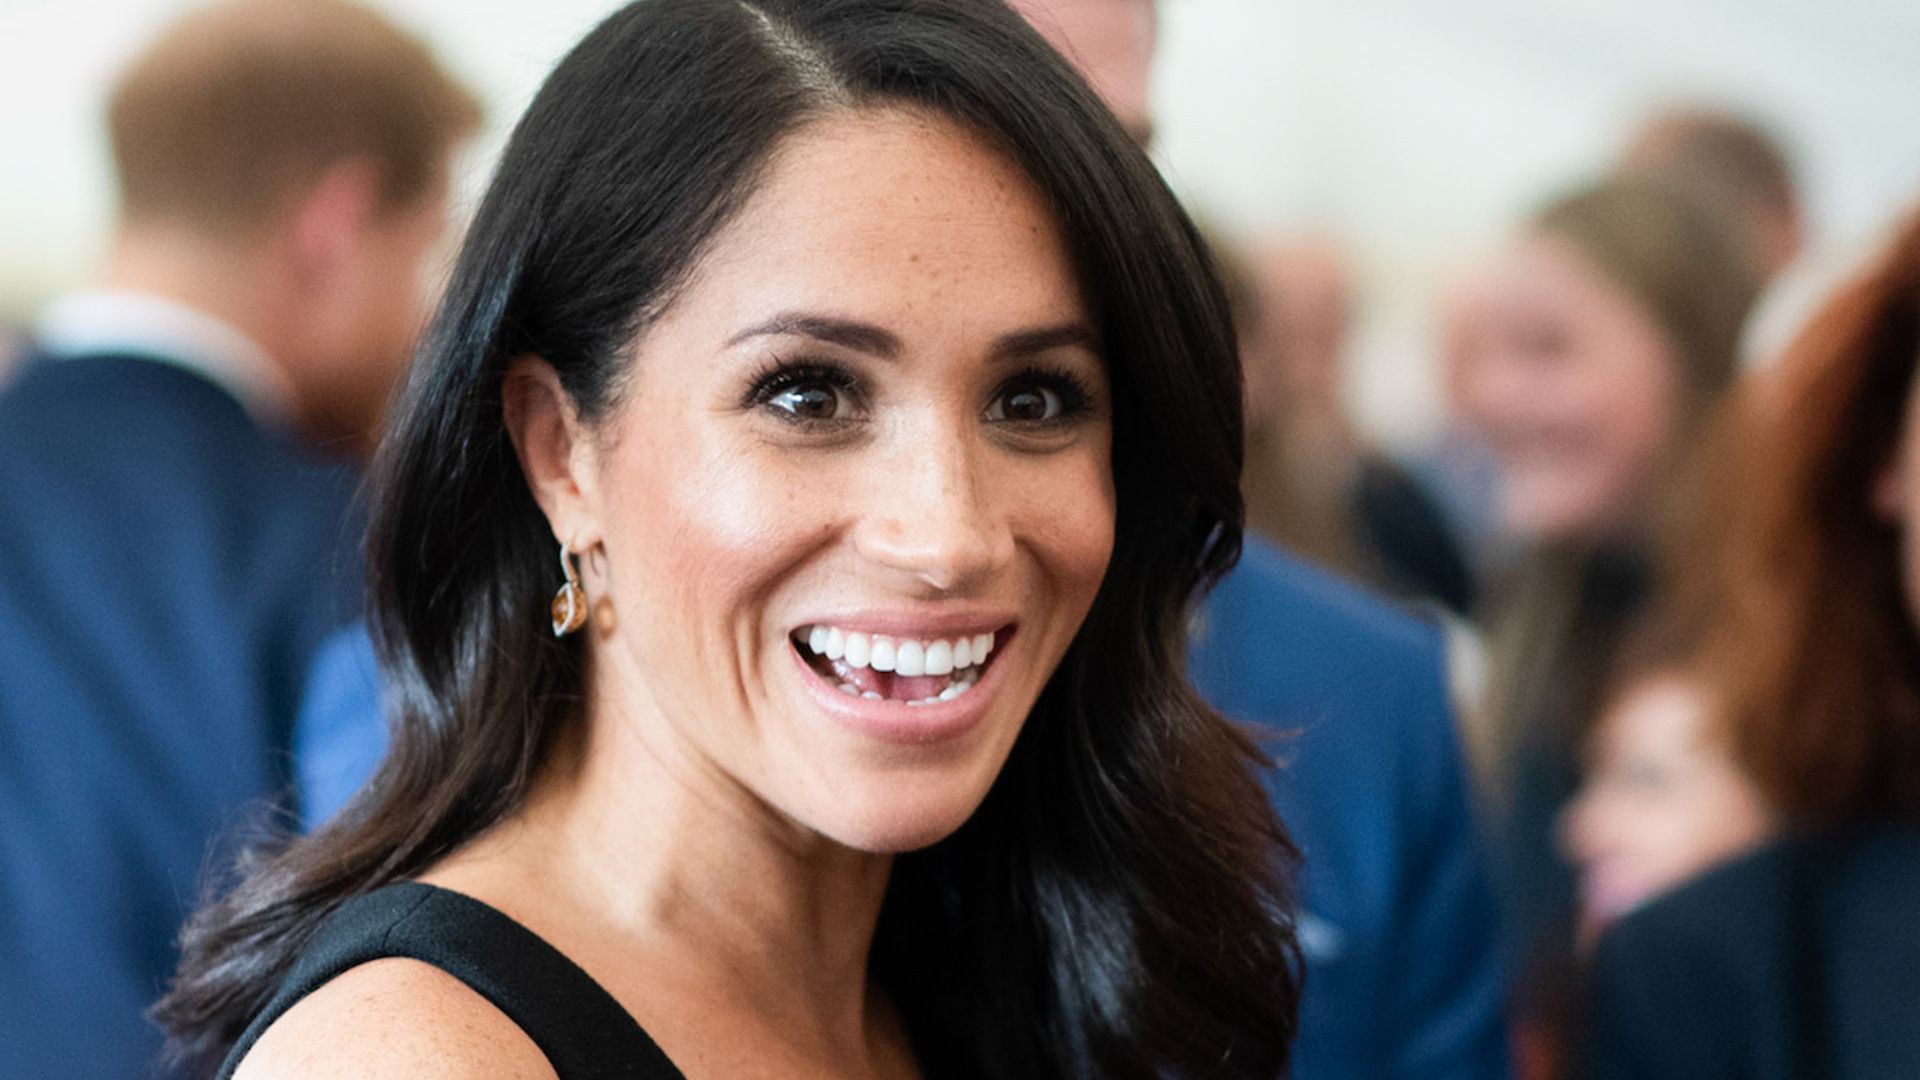 Glowing Meghan Markle sparks fan reaction with strappy dress and quirky earrings